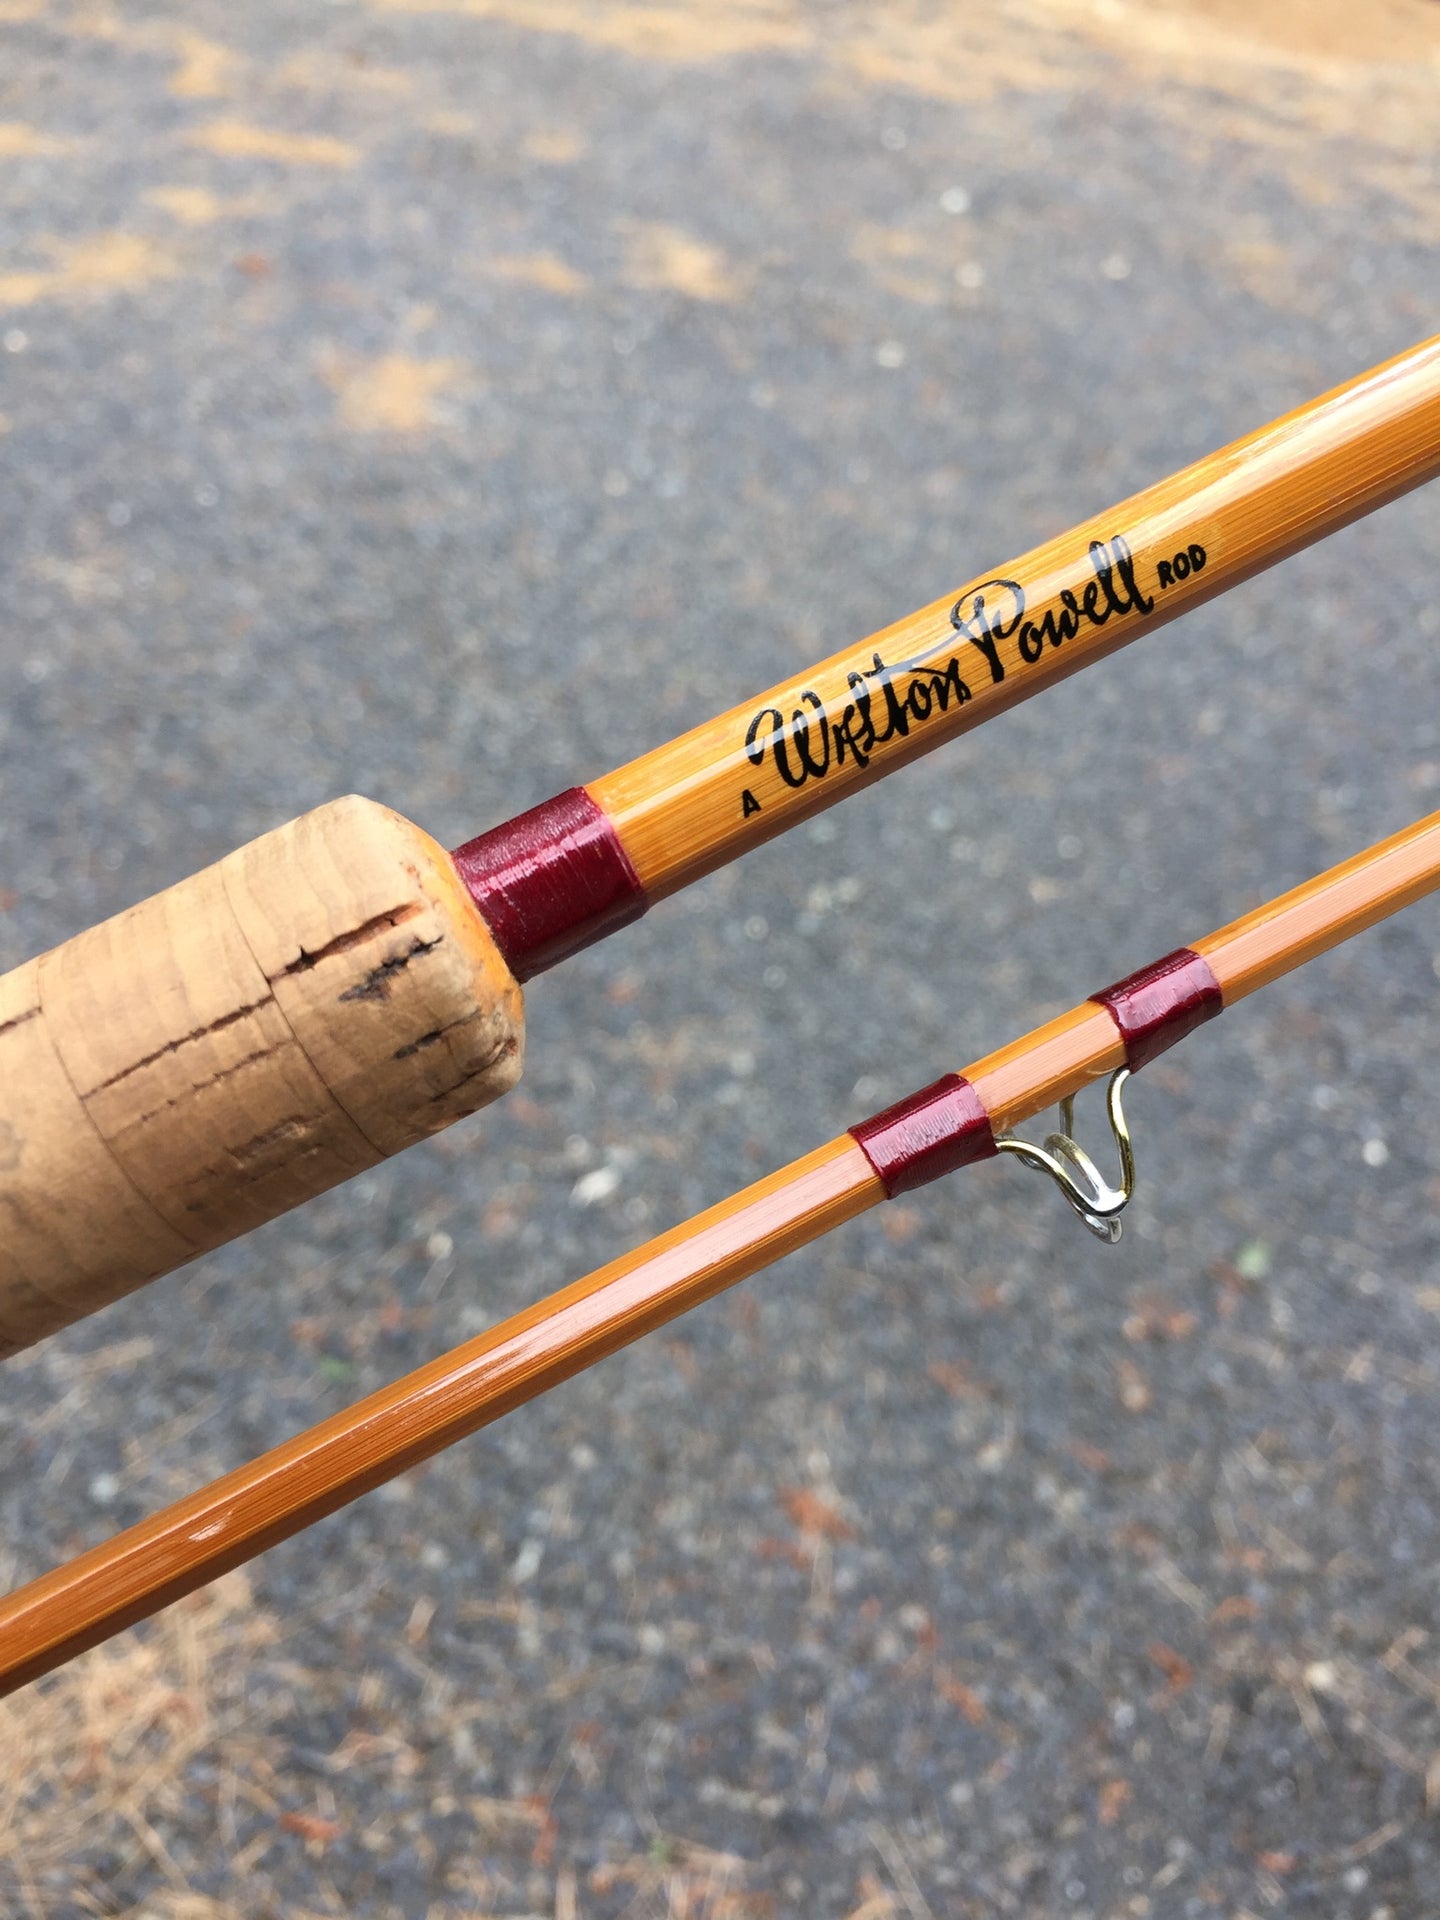 Wanted - Walton or Press Powell Fly rod Chico Ca. Era, Page 2